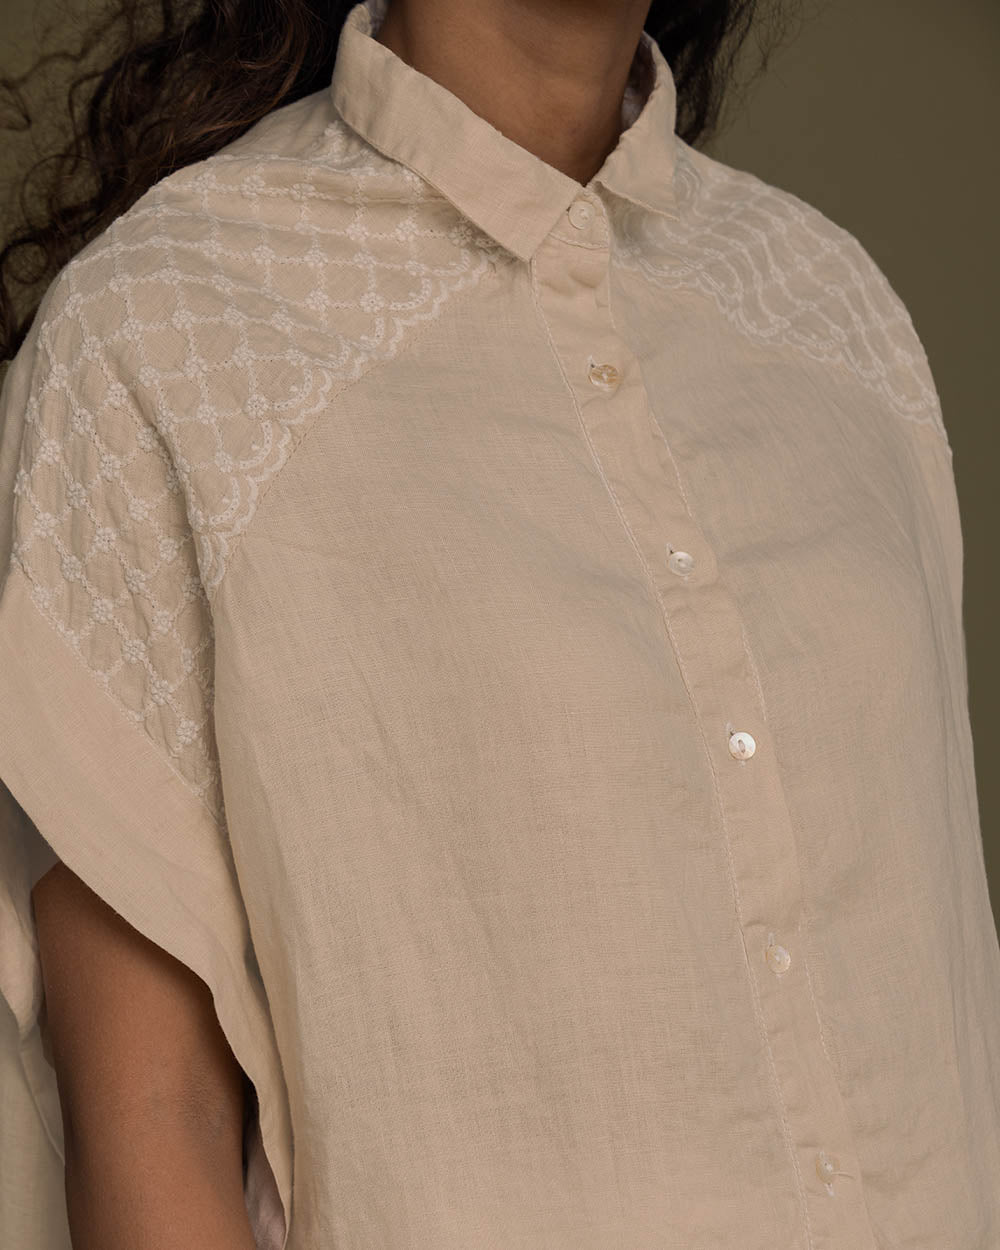 The End Of The Week Top - Sand Beige at Kamakhyaa by Reistor. This item is Brown, Casual Wear, Embroidered, Hemp, Natural, Shirts, Tops, Tunic Tops, Womenswear